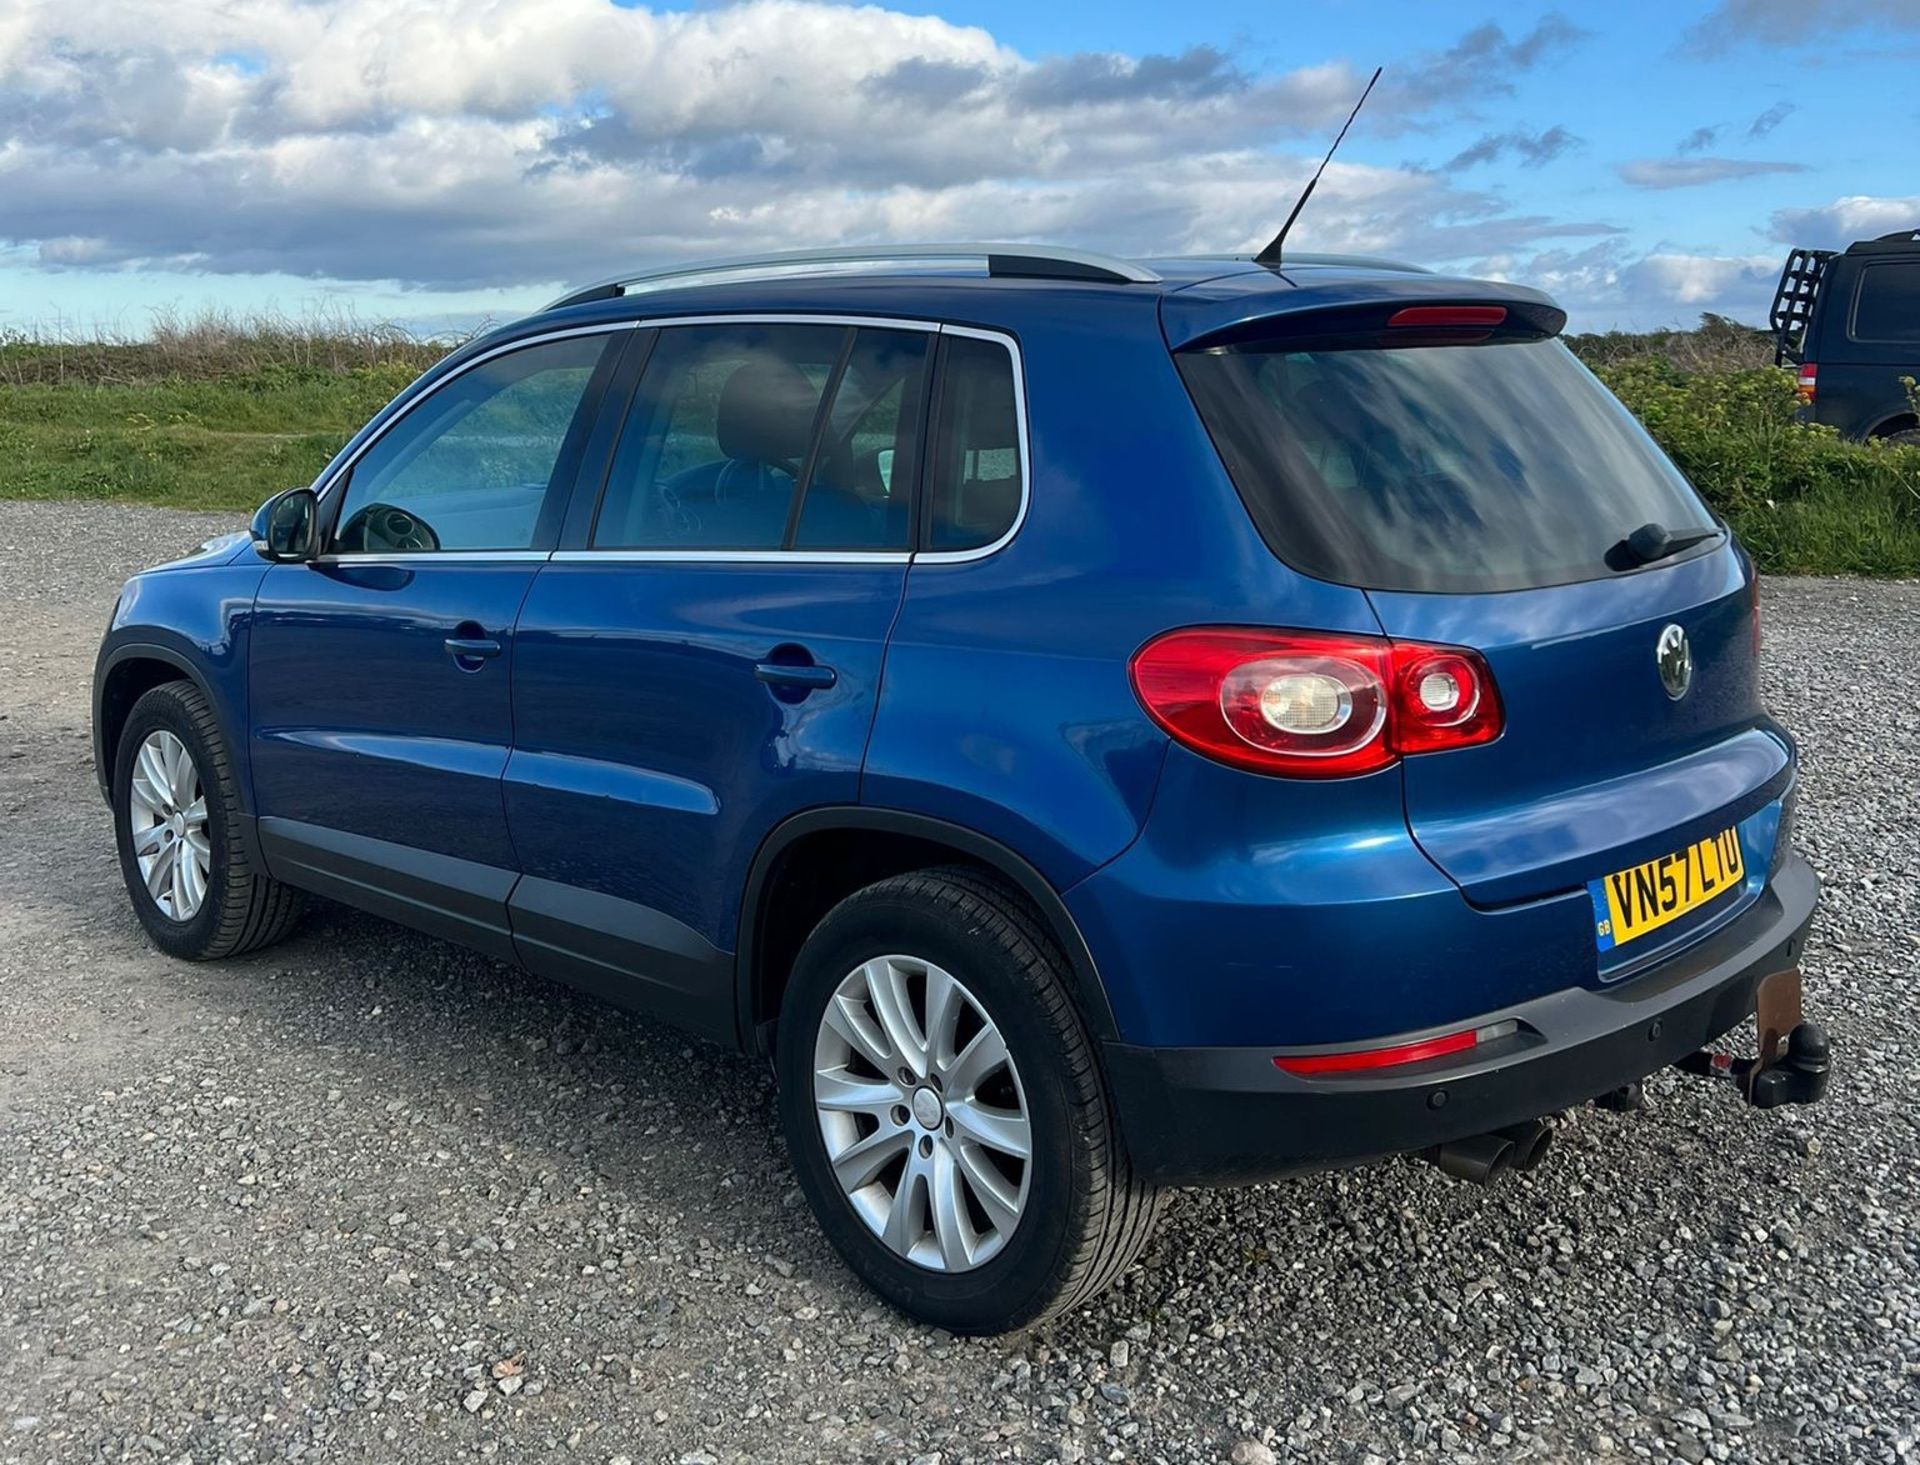 2008 Volkswagen Tiguan SE Tdi 140 - Sport pan roof with 12 months MOT - Offered at No Reserve - Image 5 of 16